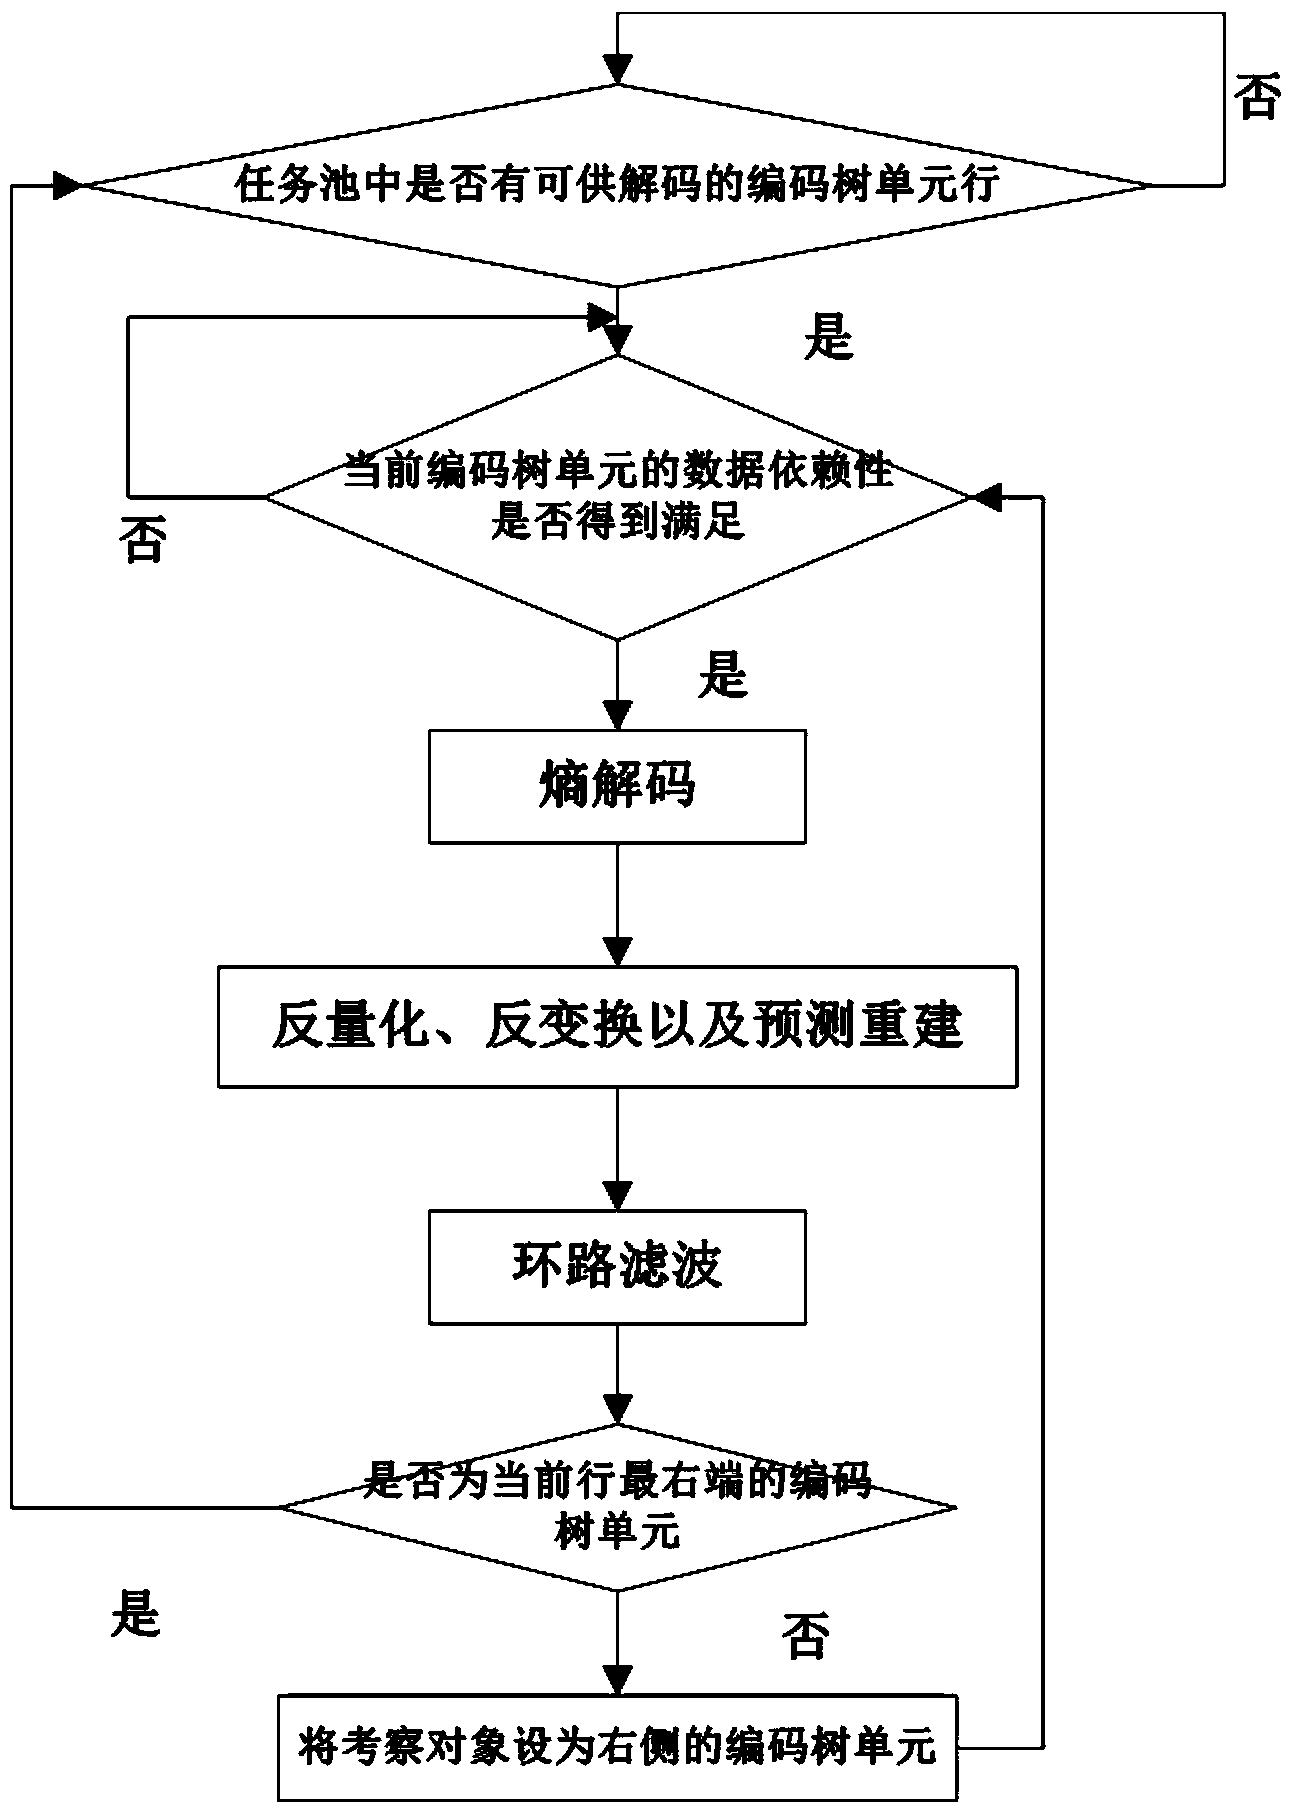 Parallel task partitioning method for HEVC decoder